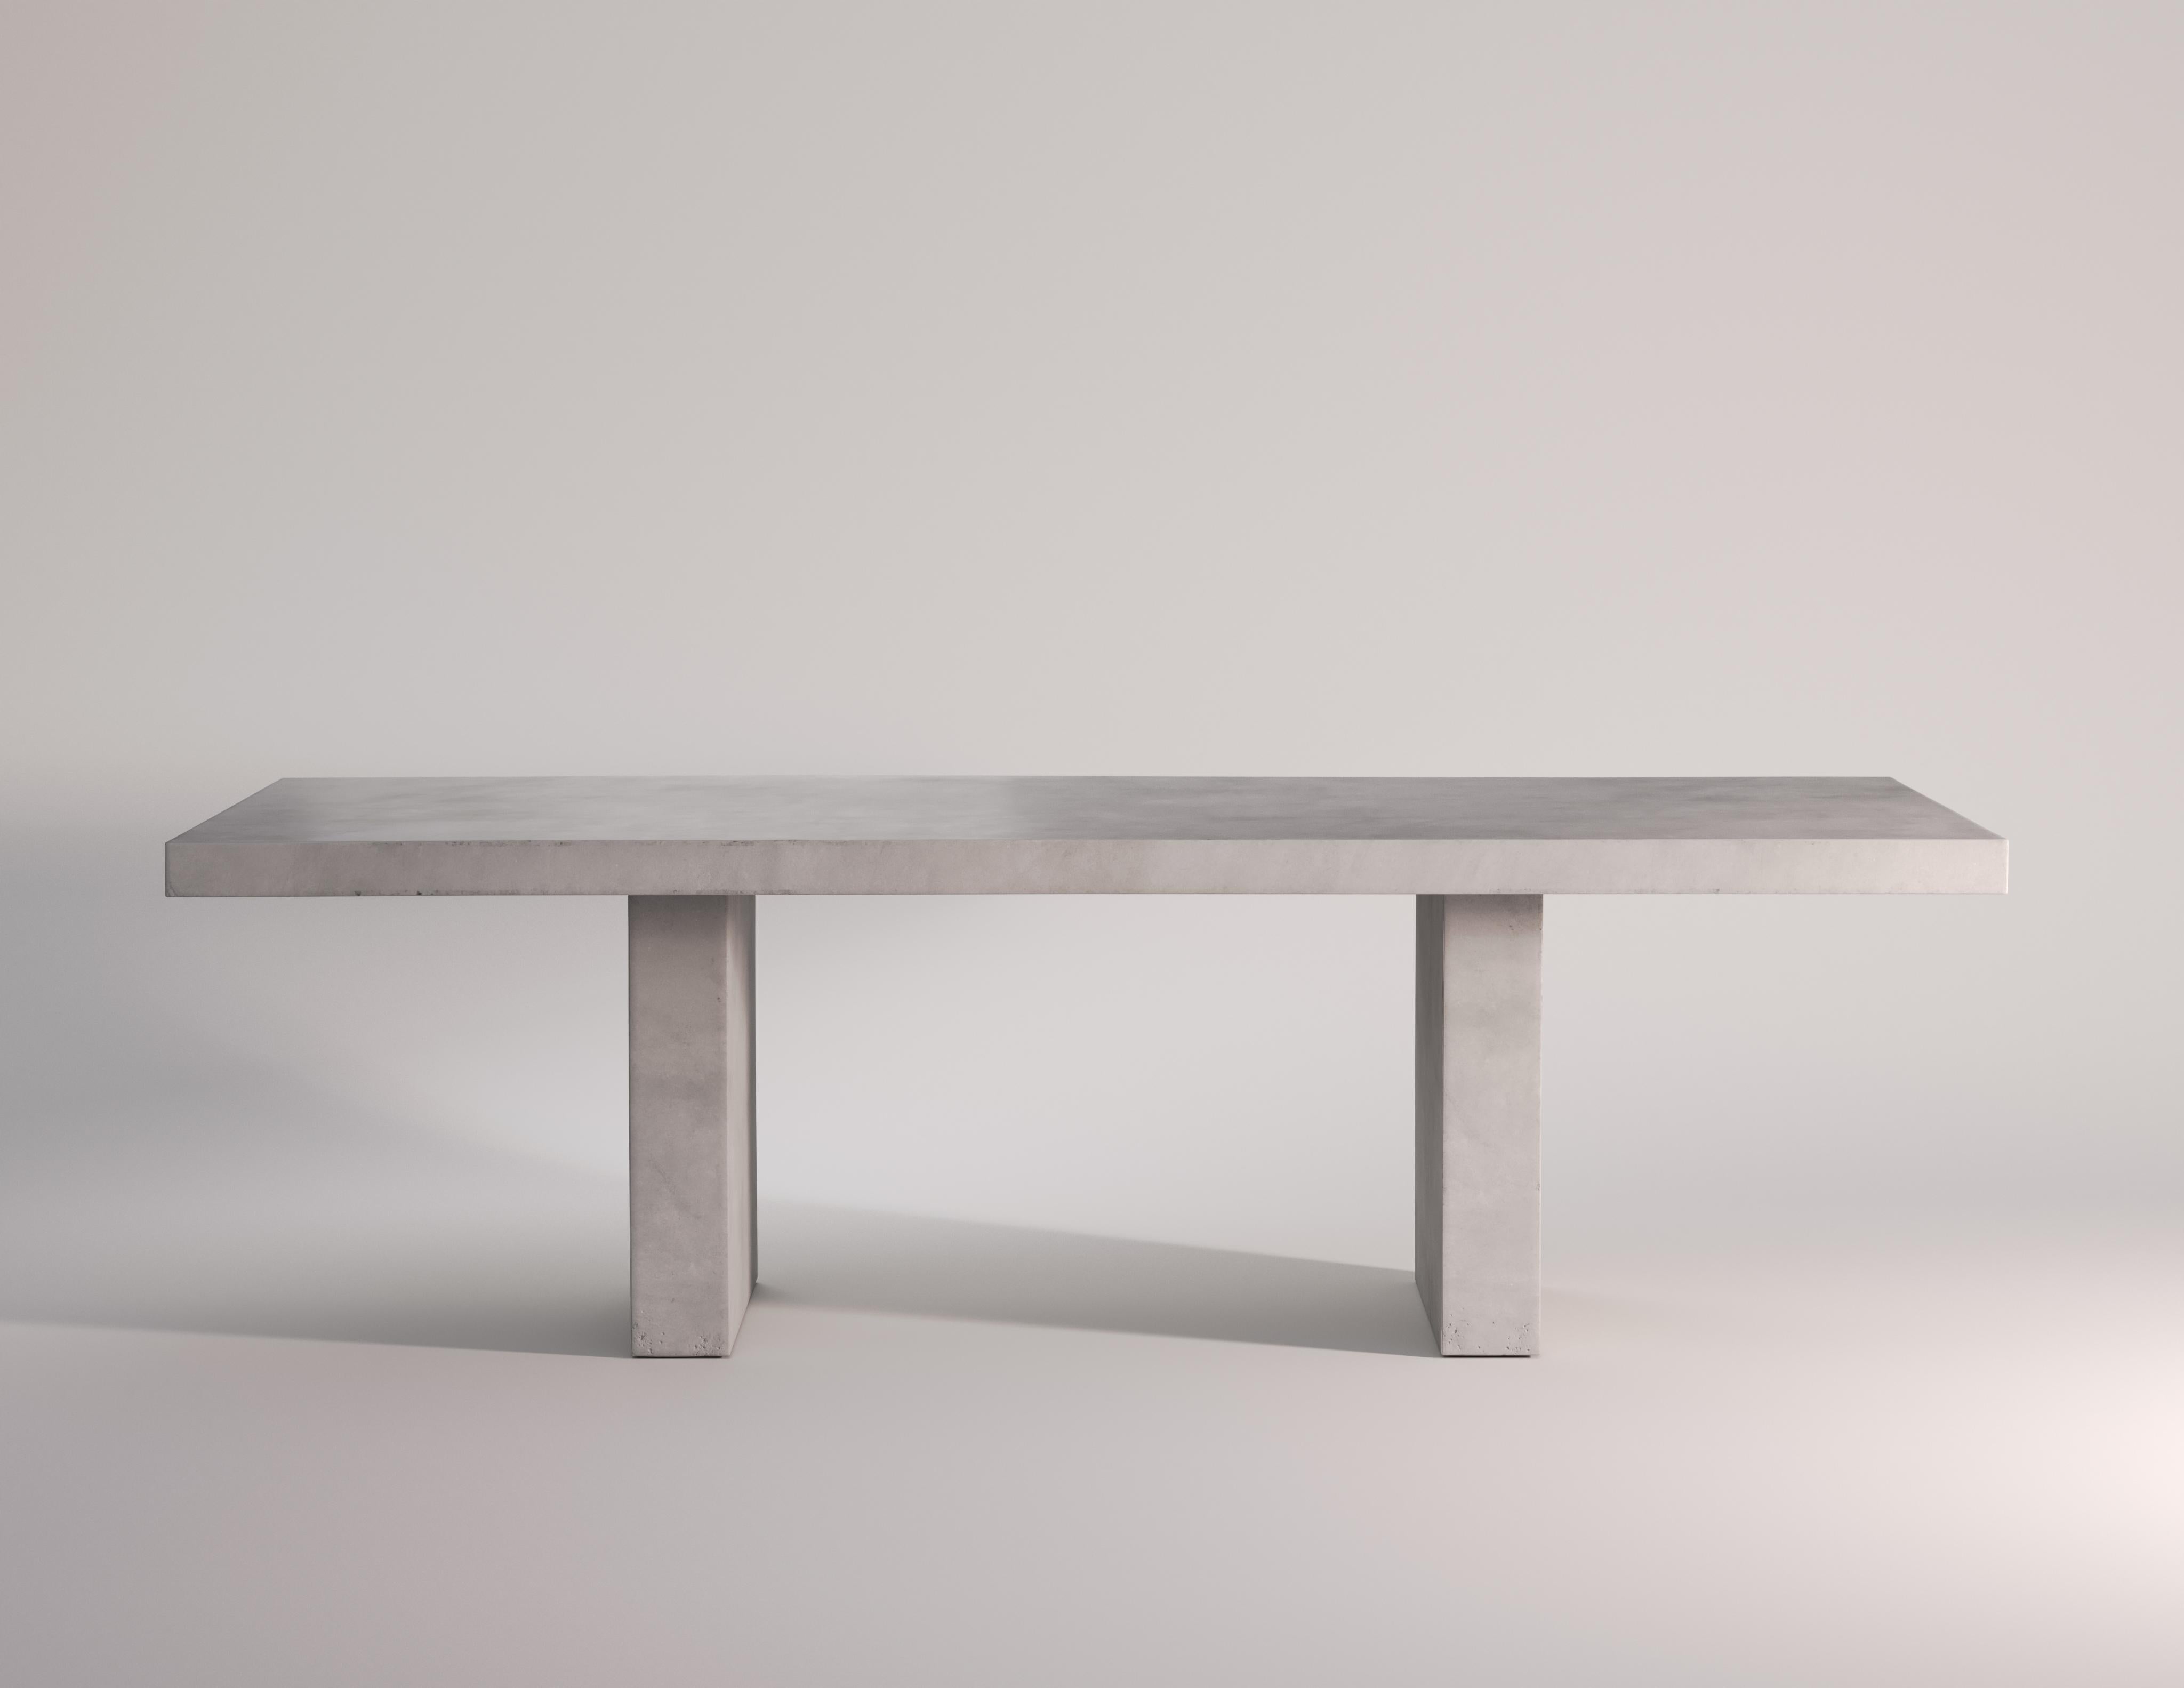 Elementary, functional, customisable. Giorgione is a sculptural piece that brings to mind the architectural style of the beginning of the last century, fitting perfectly in any environment.

Both the tabletop and the symmetrical legs are made of